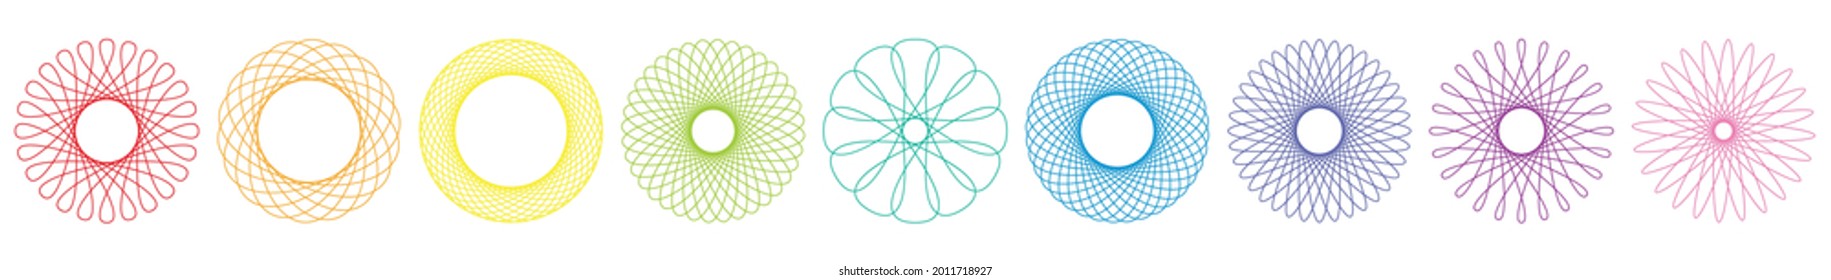 Spirograph graphic flowers, colorful different geometric circular patterns. Isolated vector illustration on white background.
